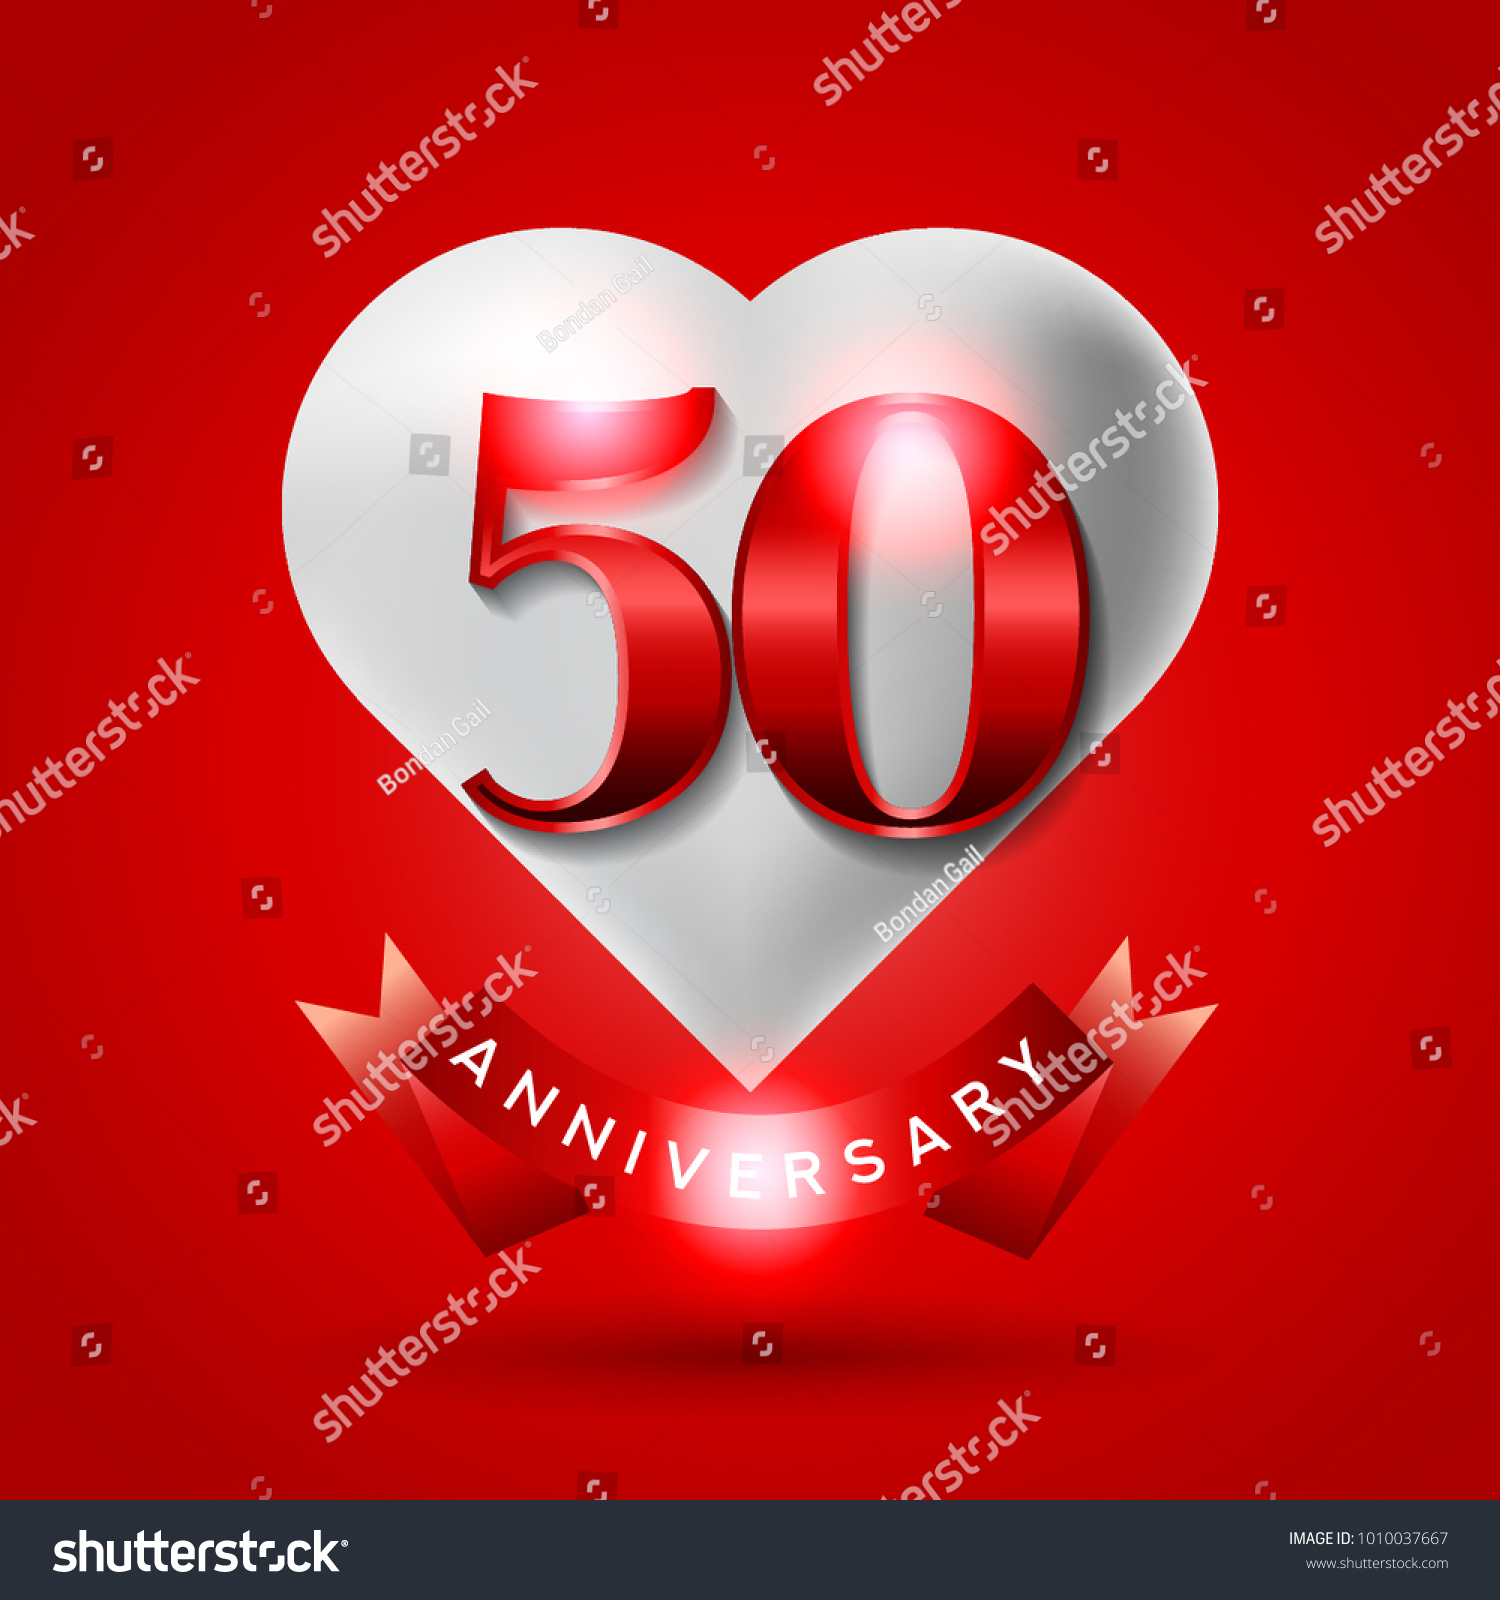 SVG of 50 Years Anniversary Logo Celebration With Love And Ribbon. Valentine’s Day Anniversary svg